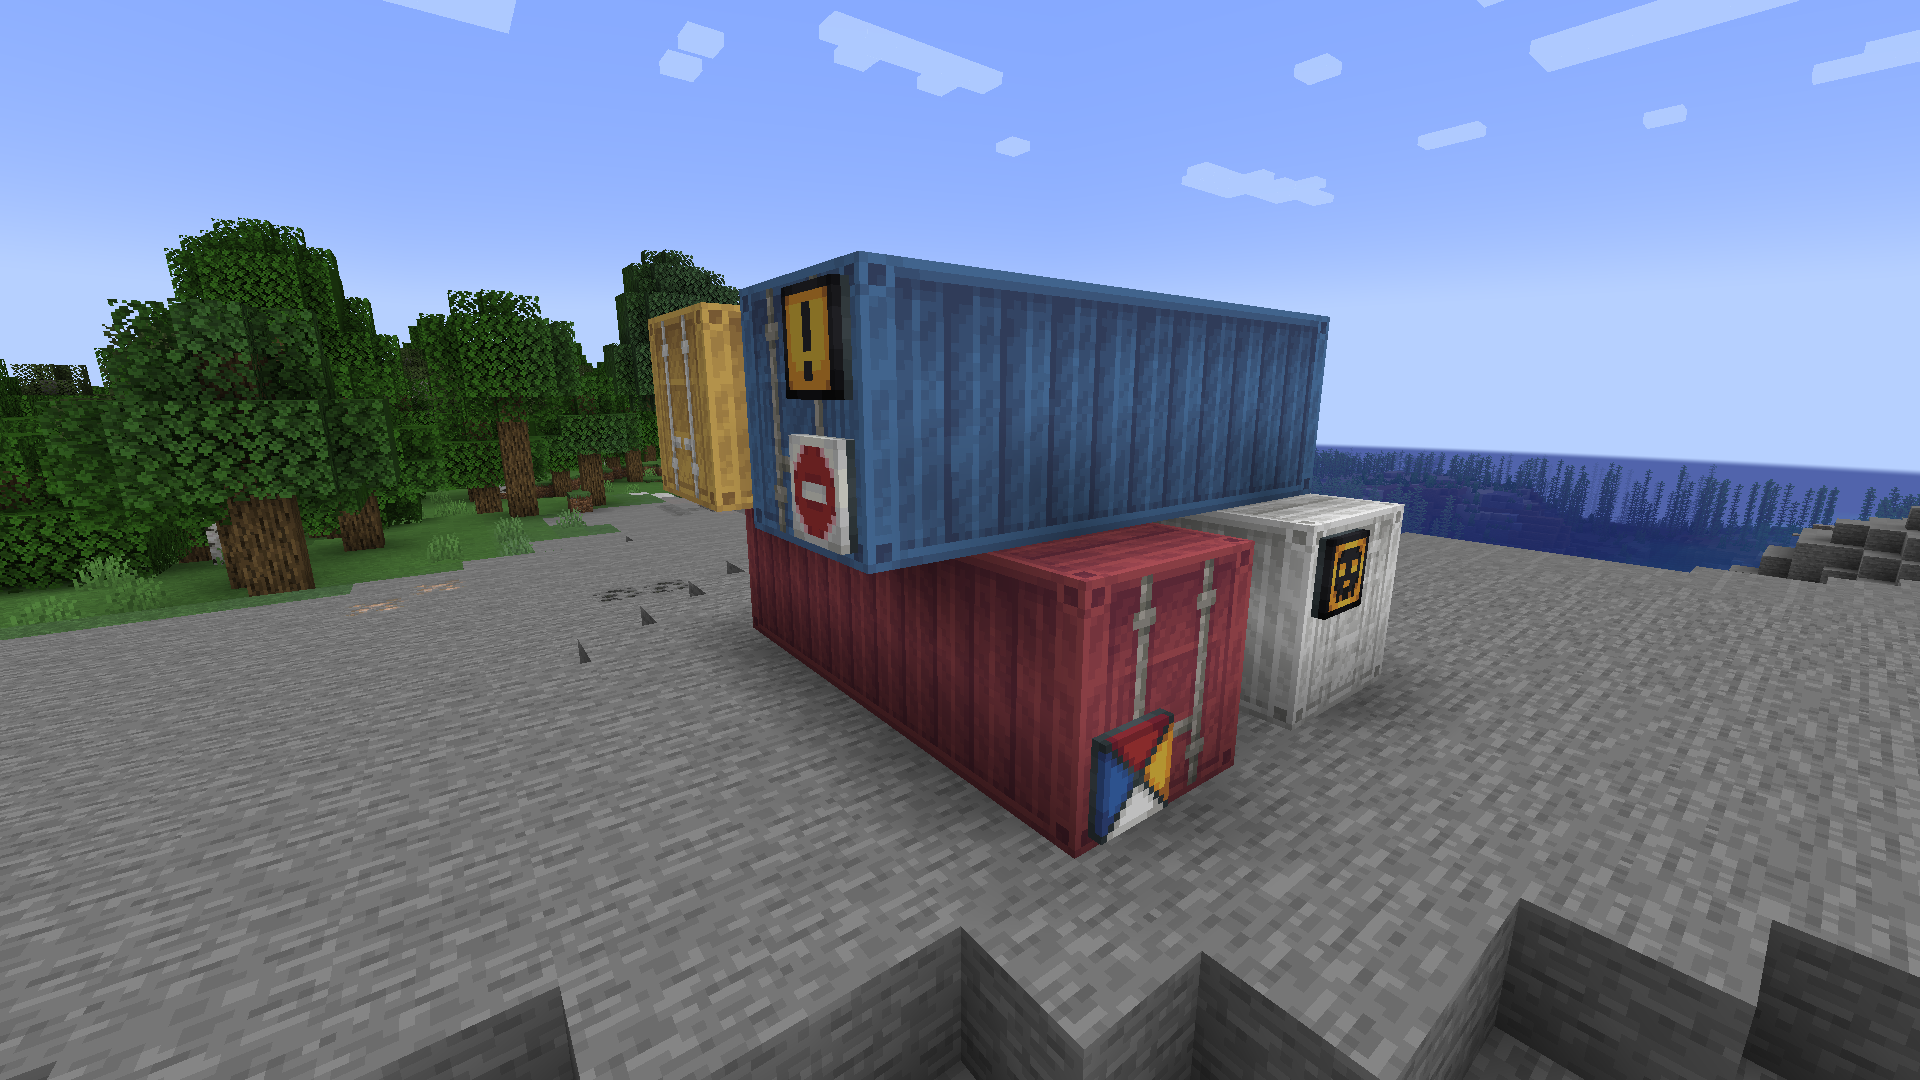 Shipping Containers and Decals